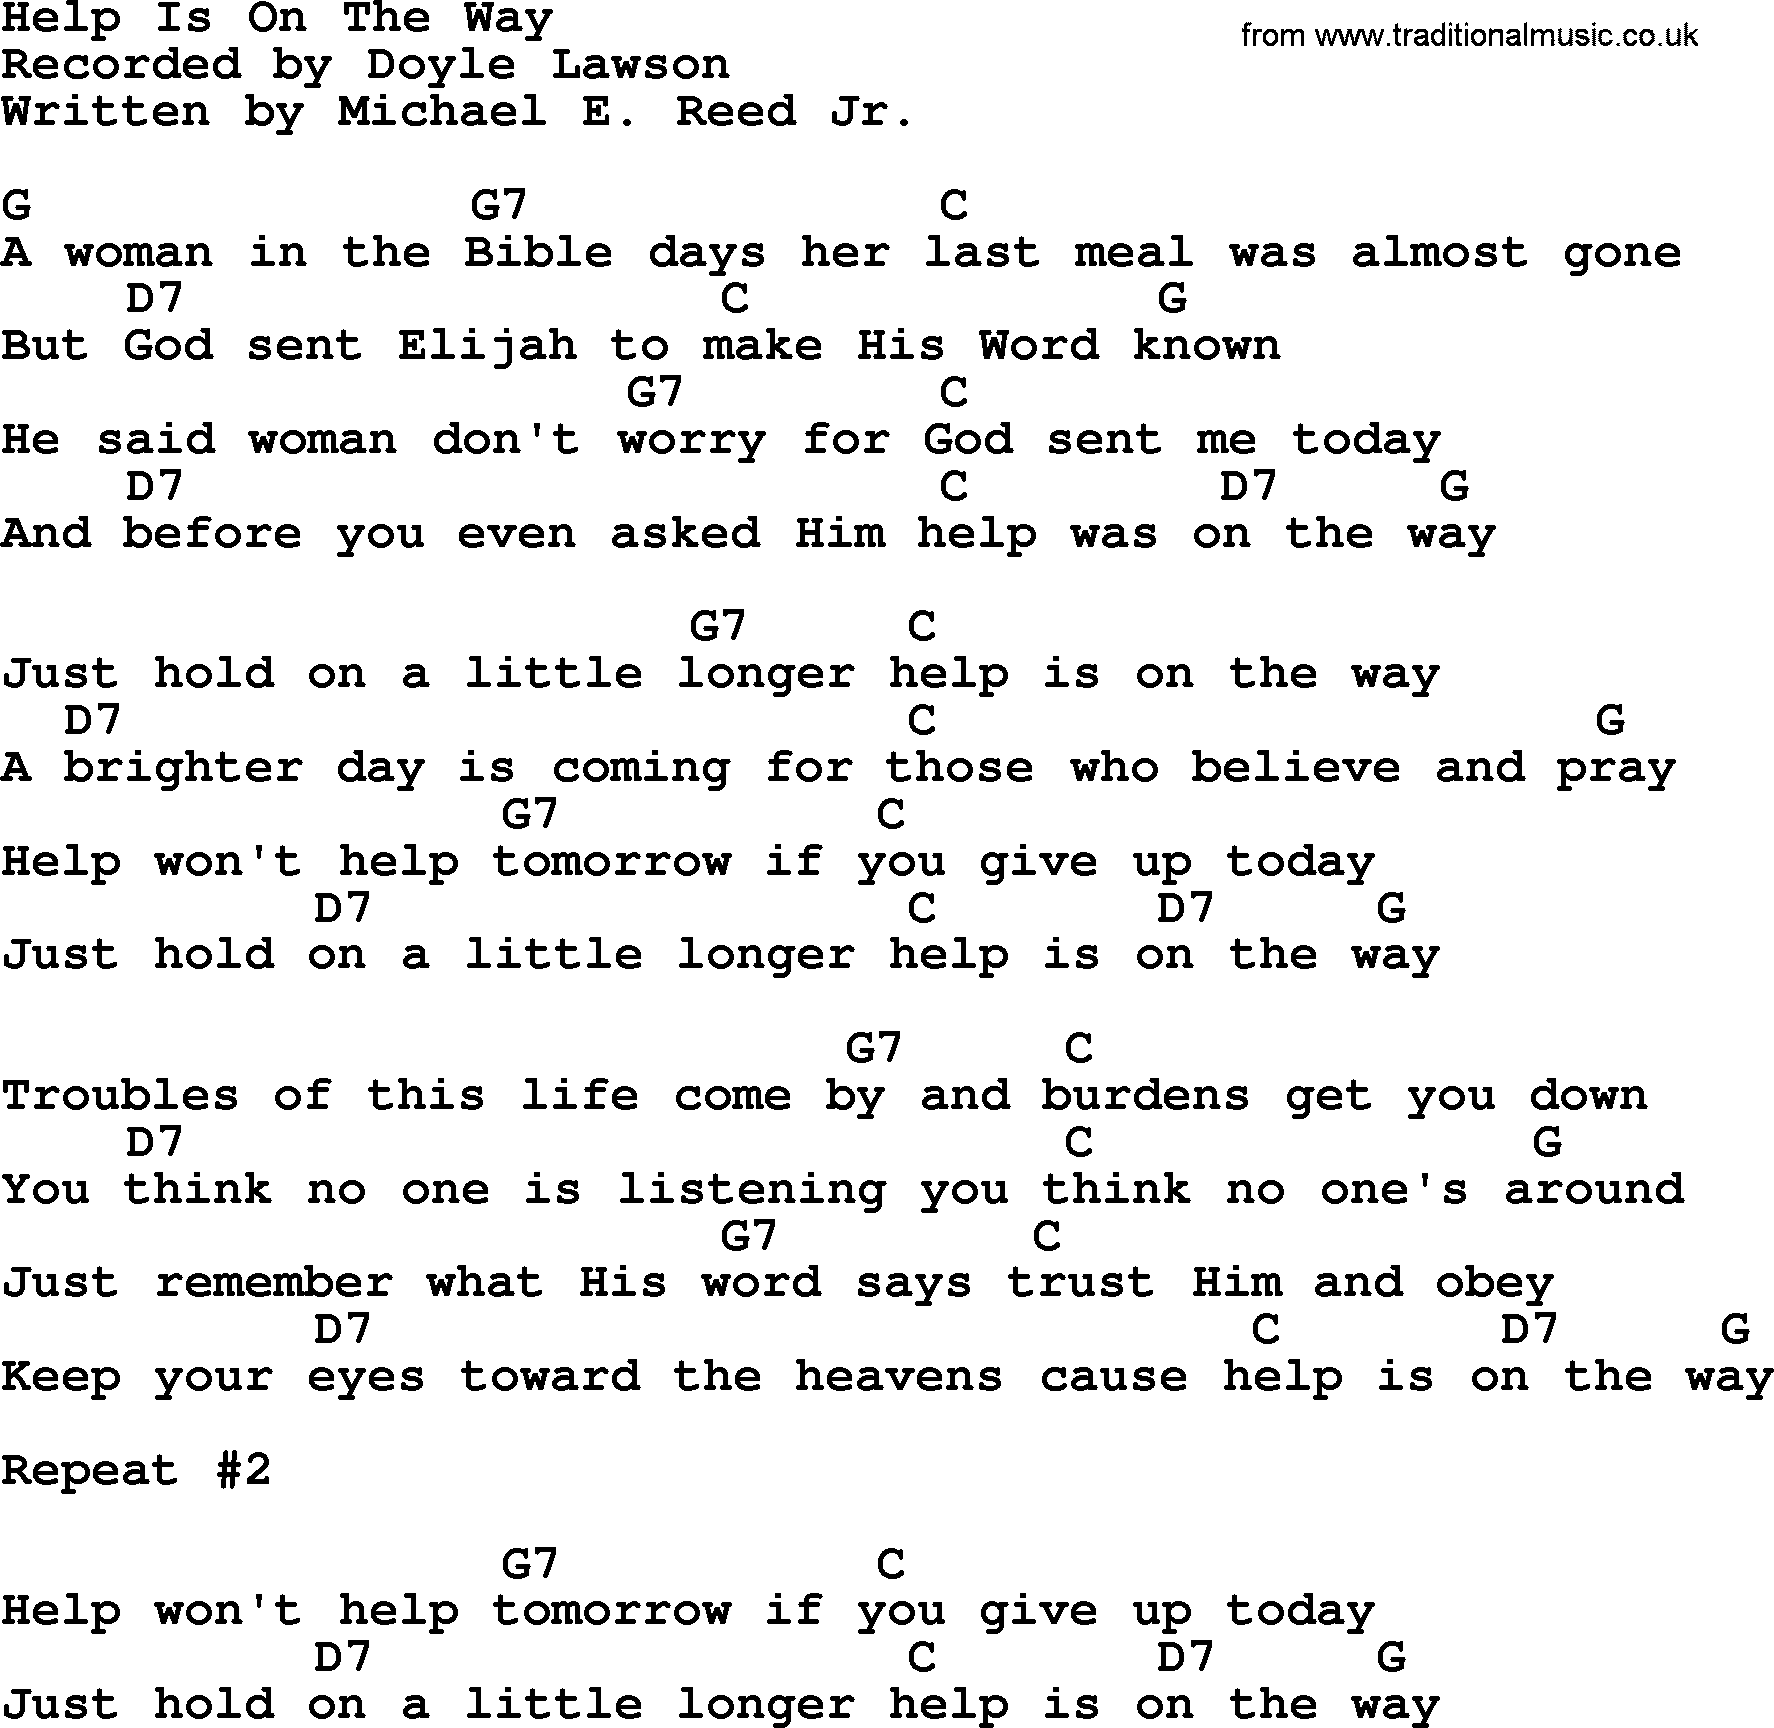 Bluegrass song: Help Is On The Way, lyrics and chords